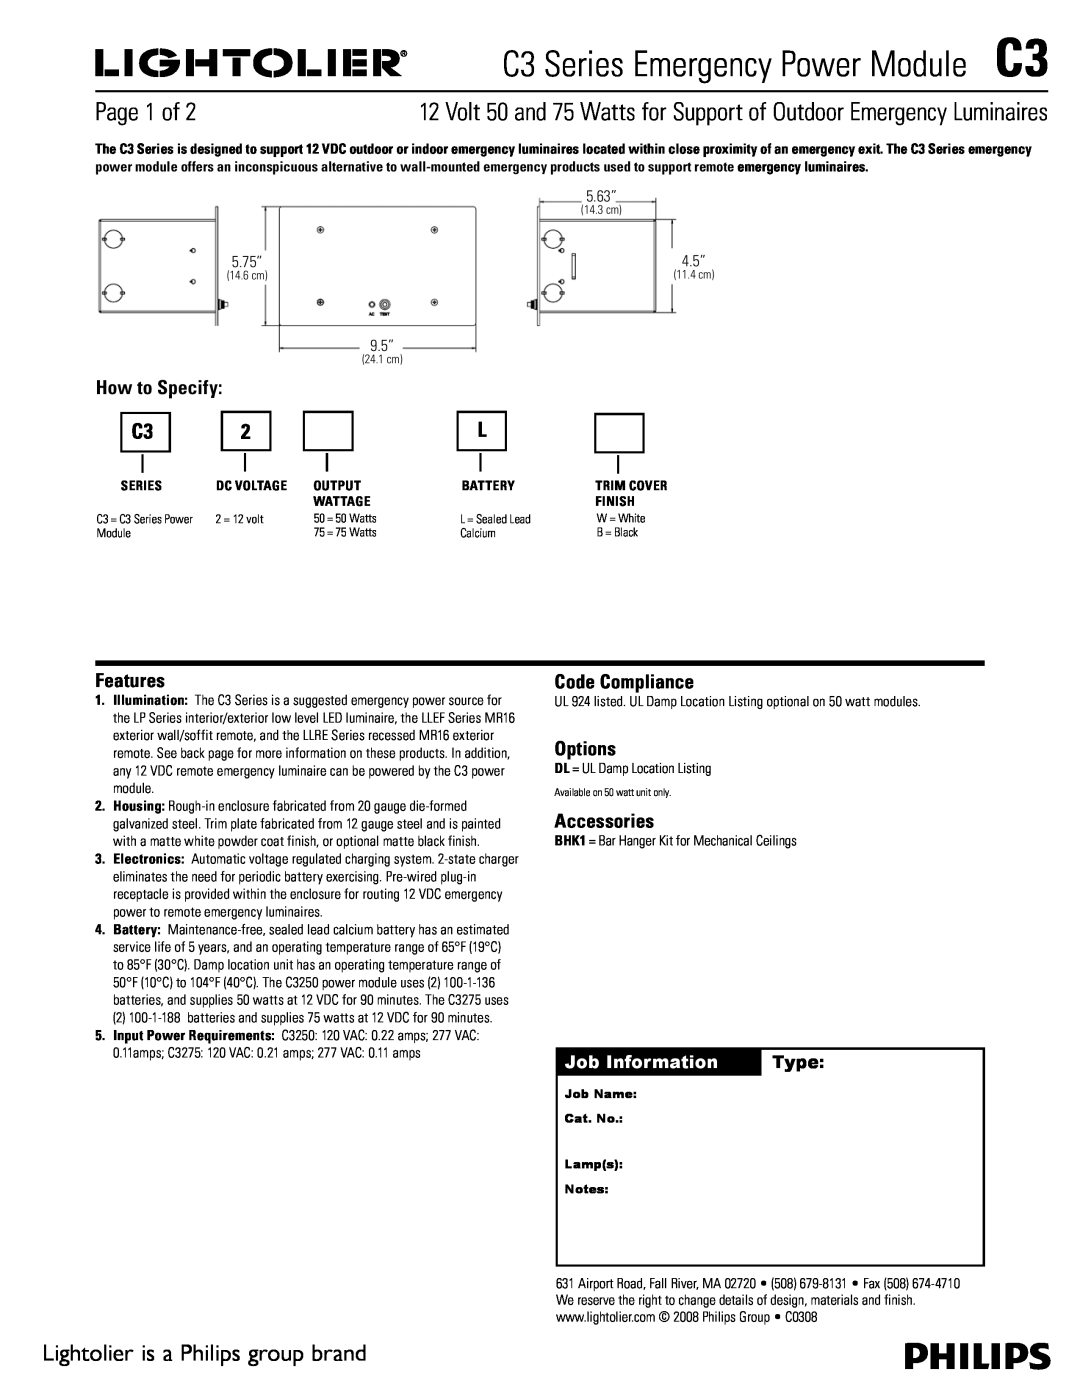 Lightolier C3 Series manual C3 Series Emergency Power ModuleC3, Page 1 of, Lightolier is a Philips group brand, Features 